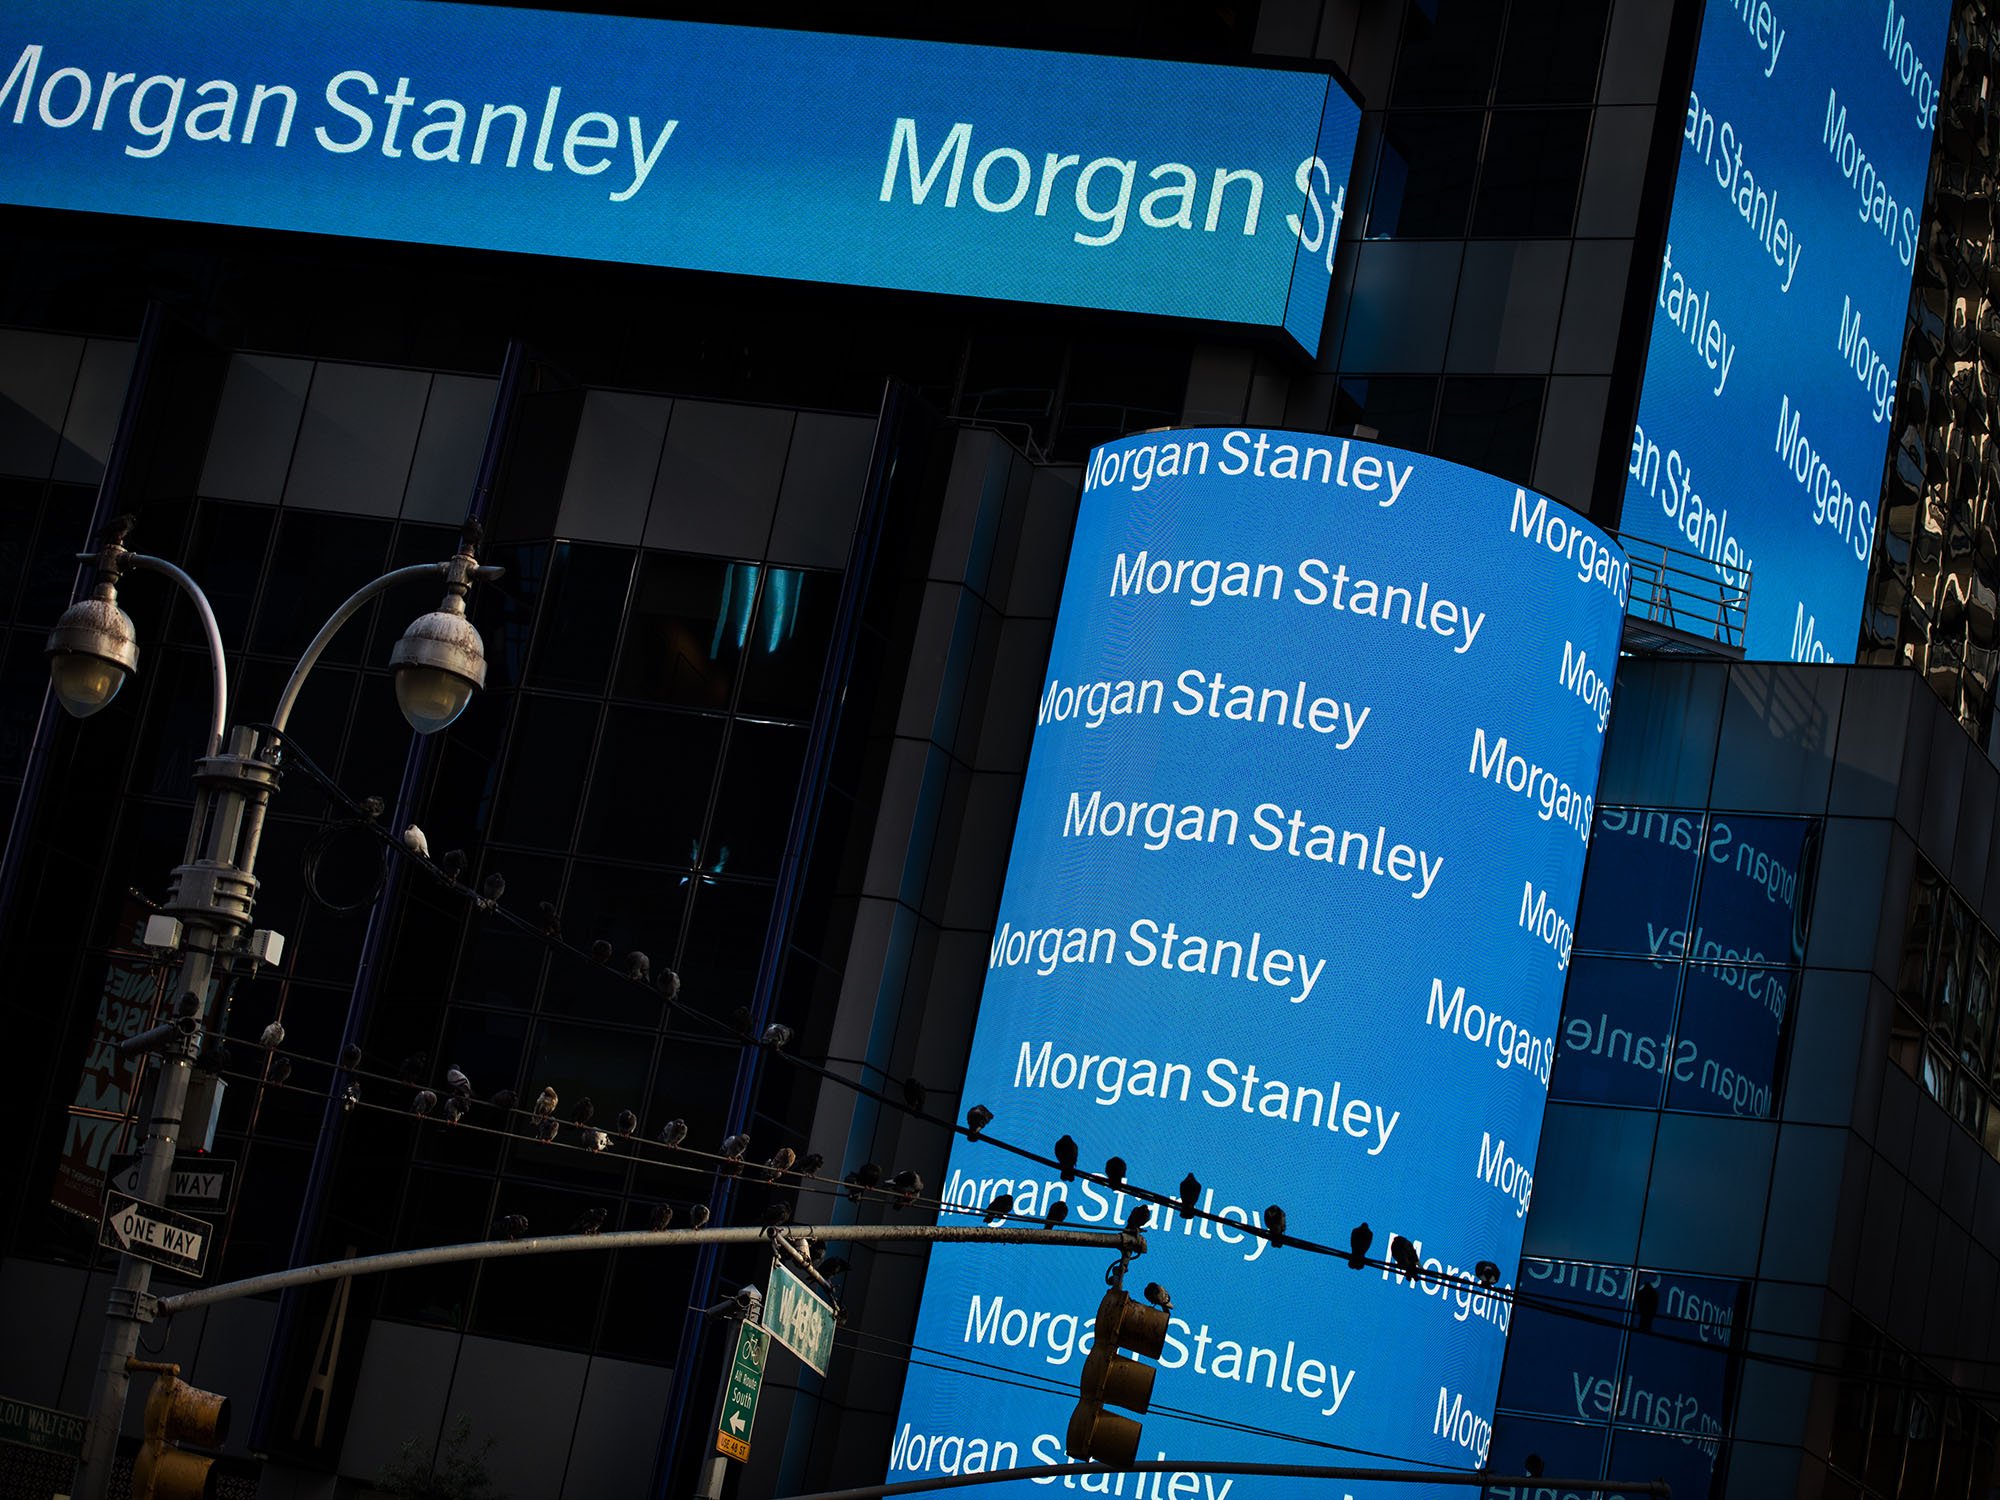 Morgan Stanley digital signage is displayed on the exterior of the company's headquarters in New York.